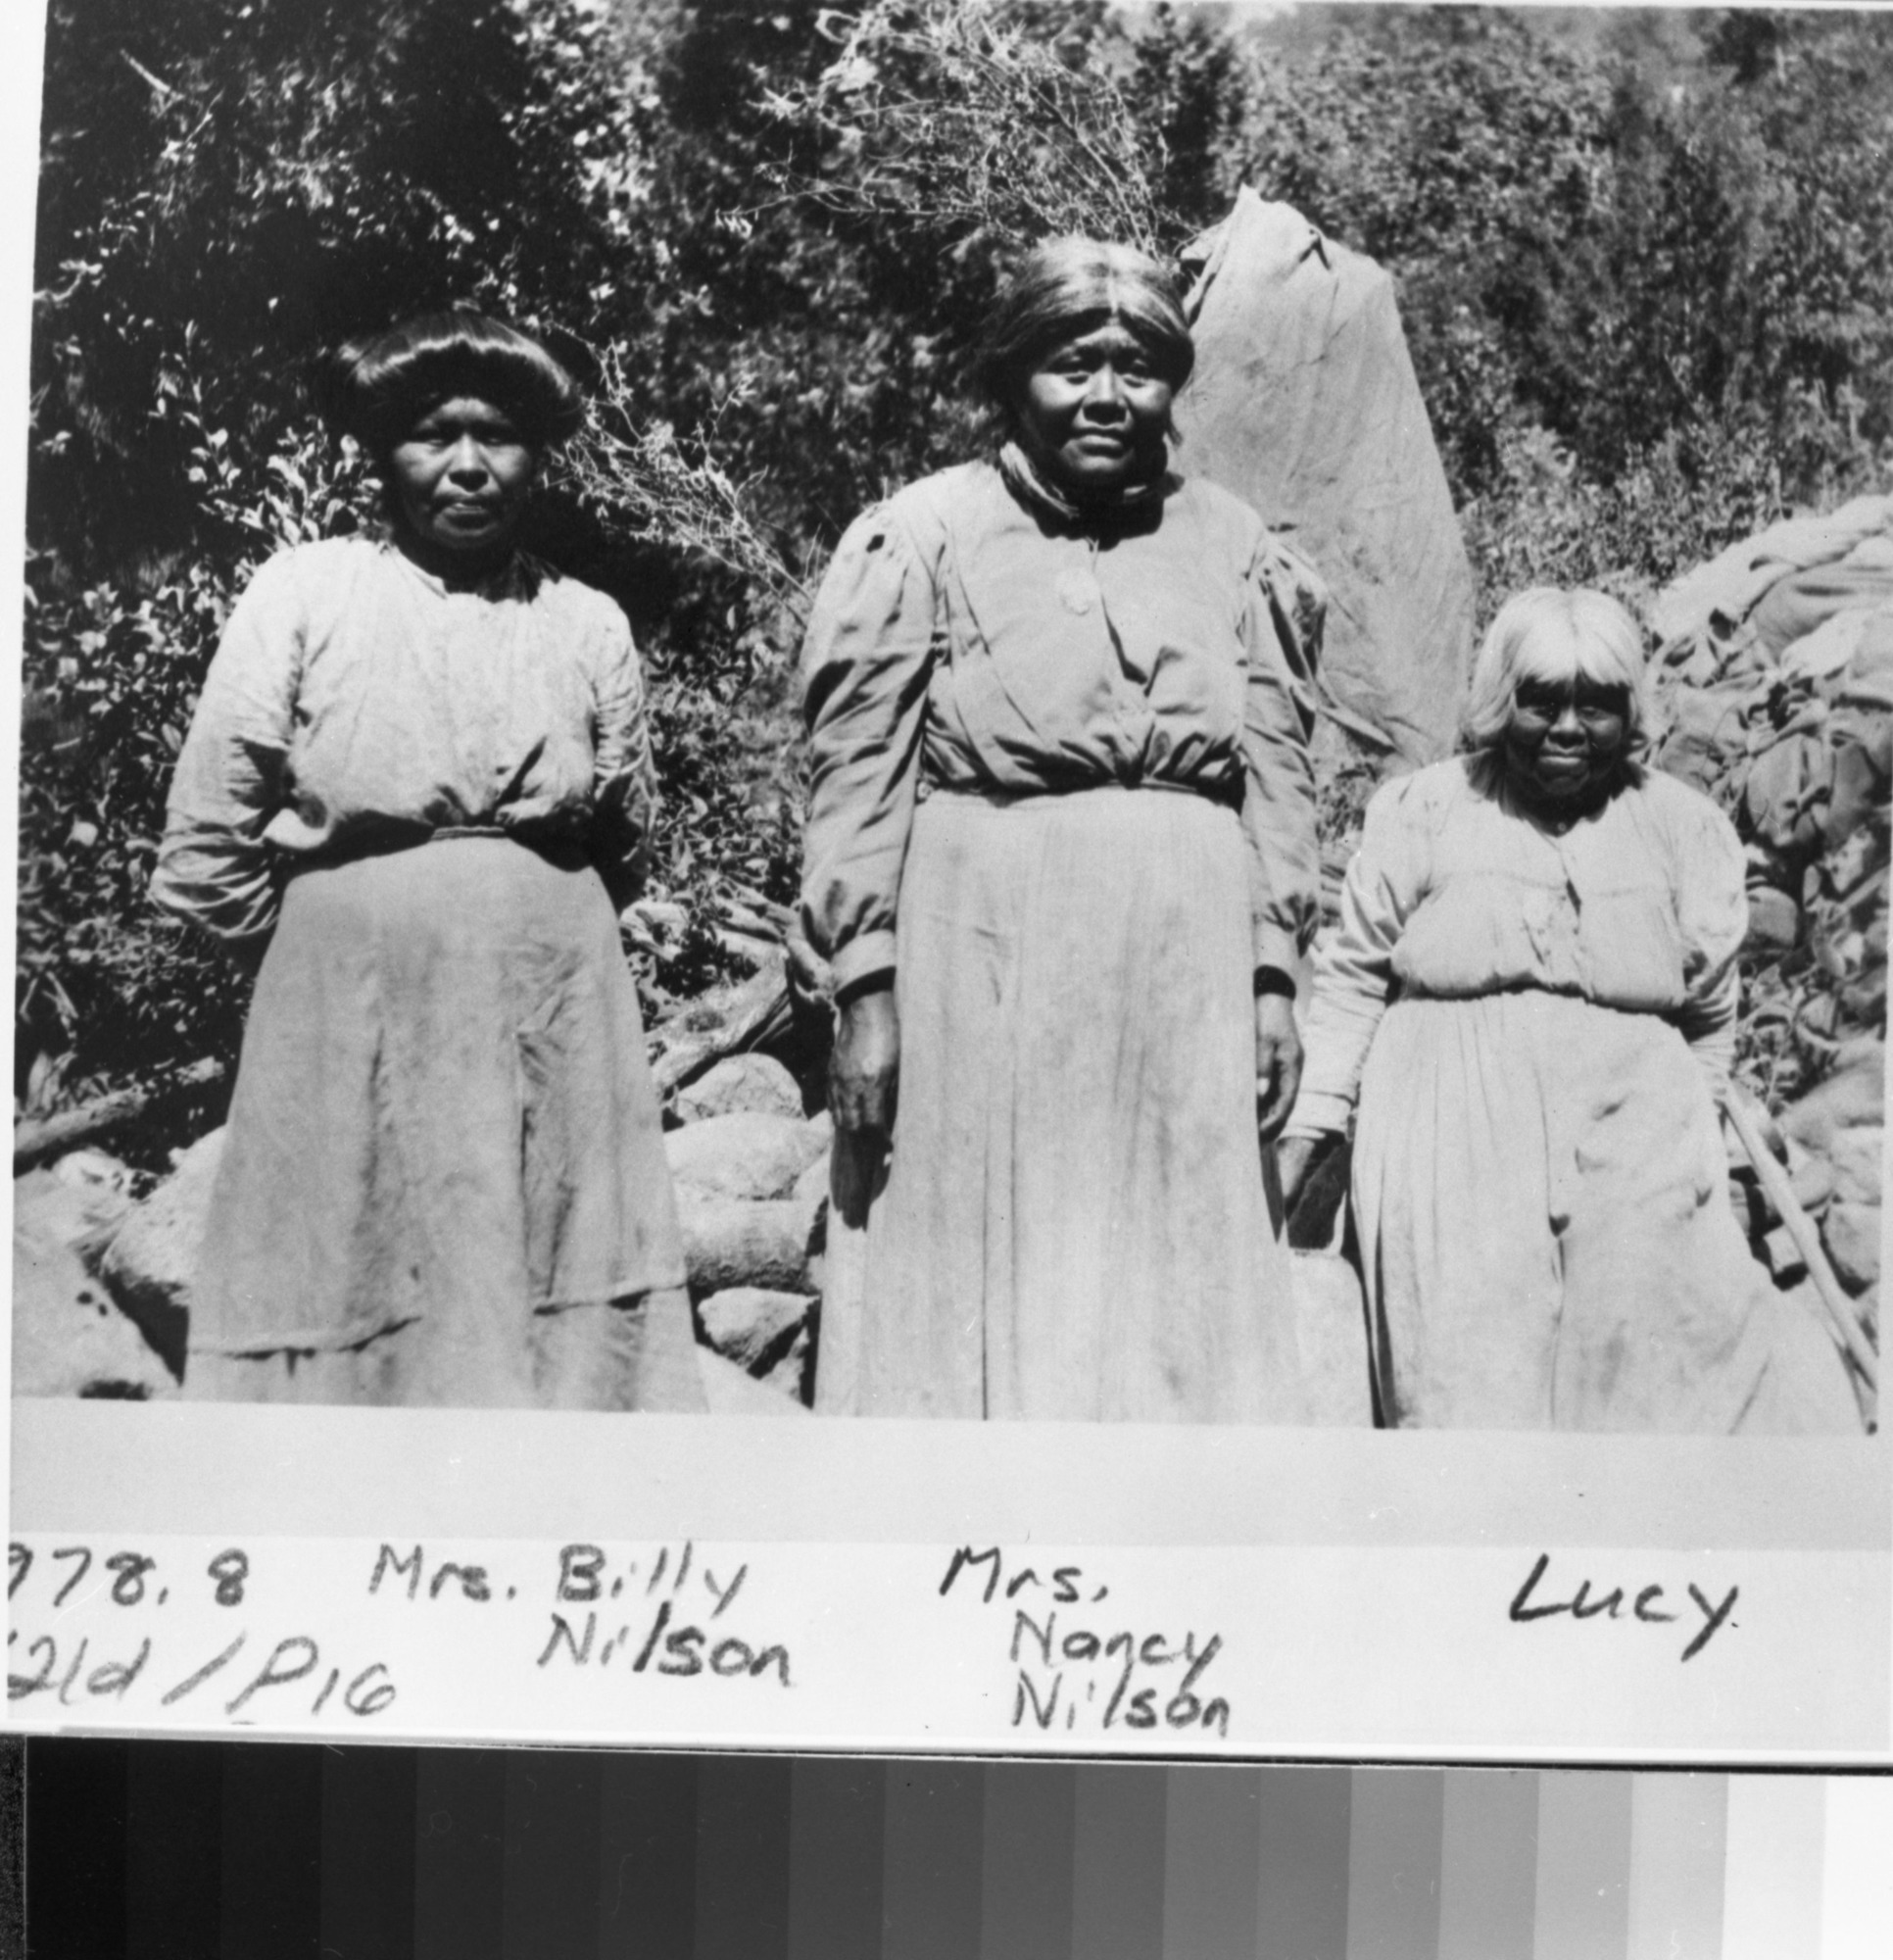 L to R: Mrs. Billy Wilson (also known as Lena Brown or Lena Rube), Mrs. Nancy Wilson, and Lucy (Brown). Original in the Bancroft Library, U.C. Berkeley. (1978.8 v/21d/p.16/no.3)